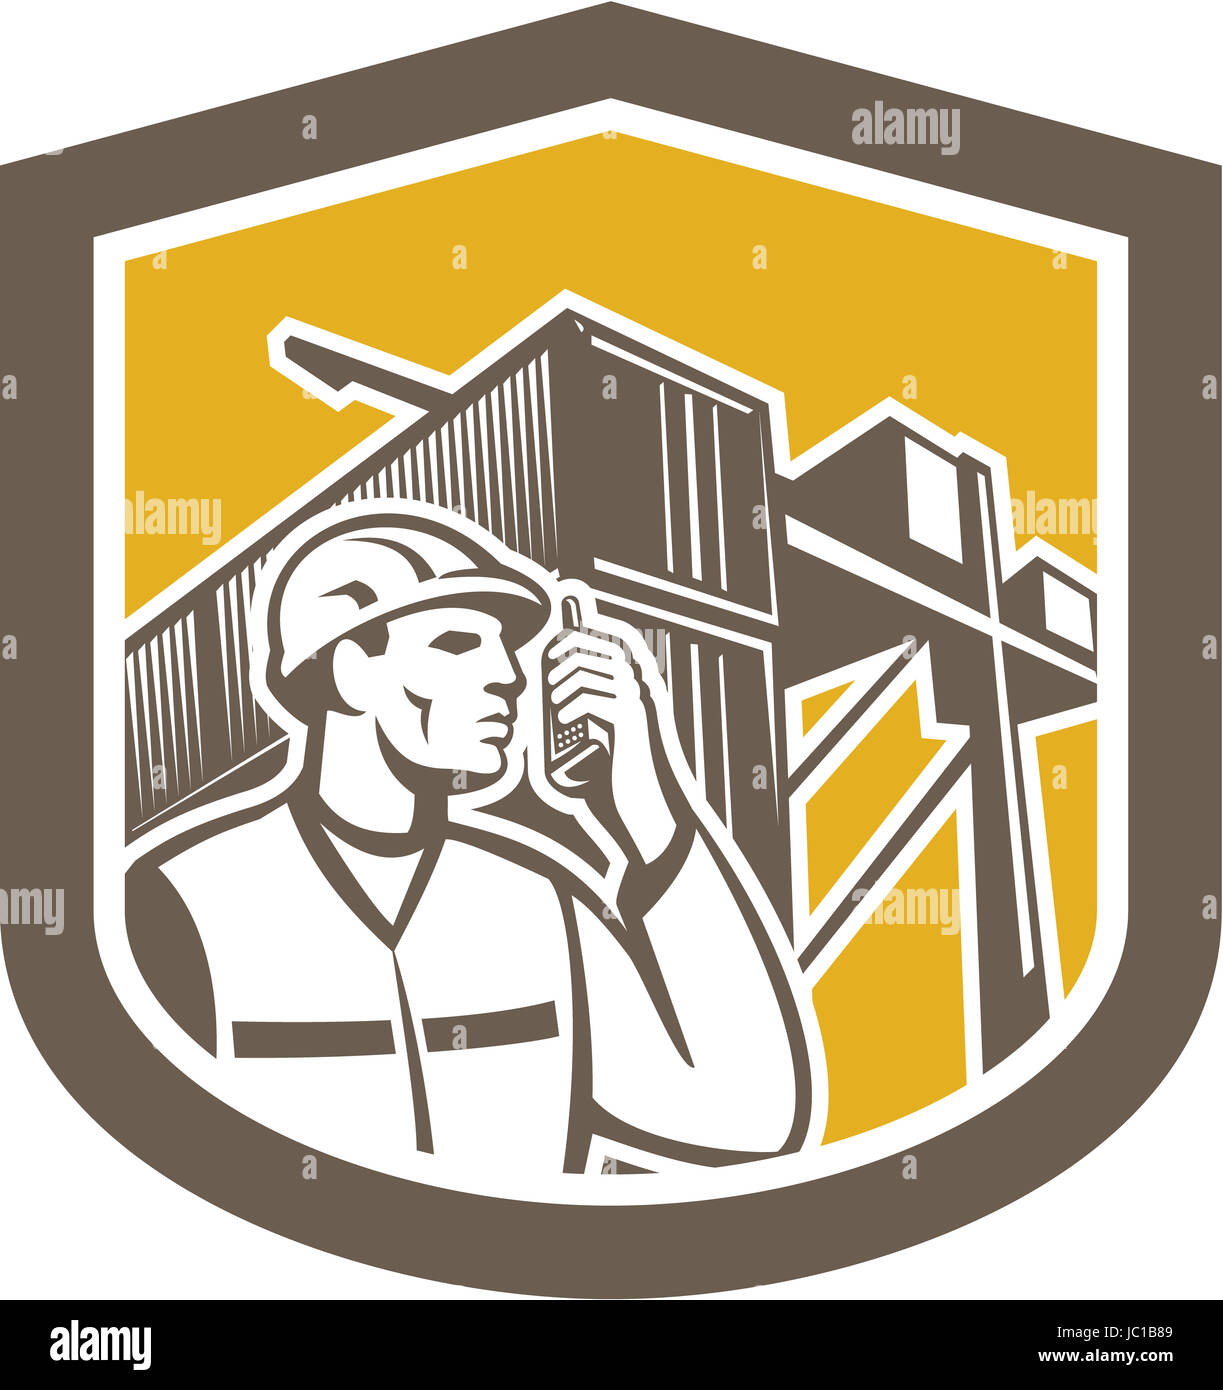 Illustration of a dock worker on phone calling with shipping containers in the background set inside shield crest done in retro style. Stock Photo